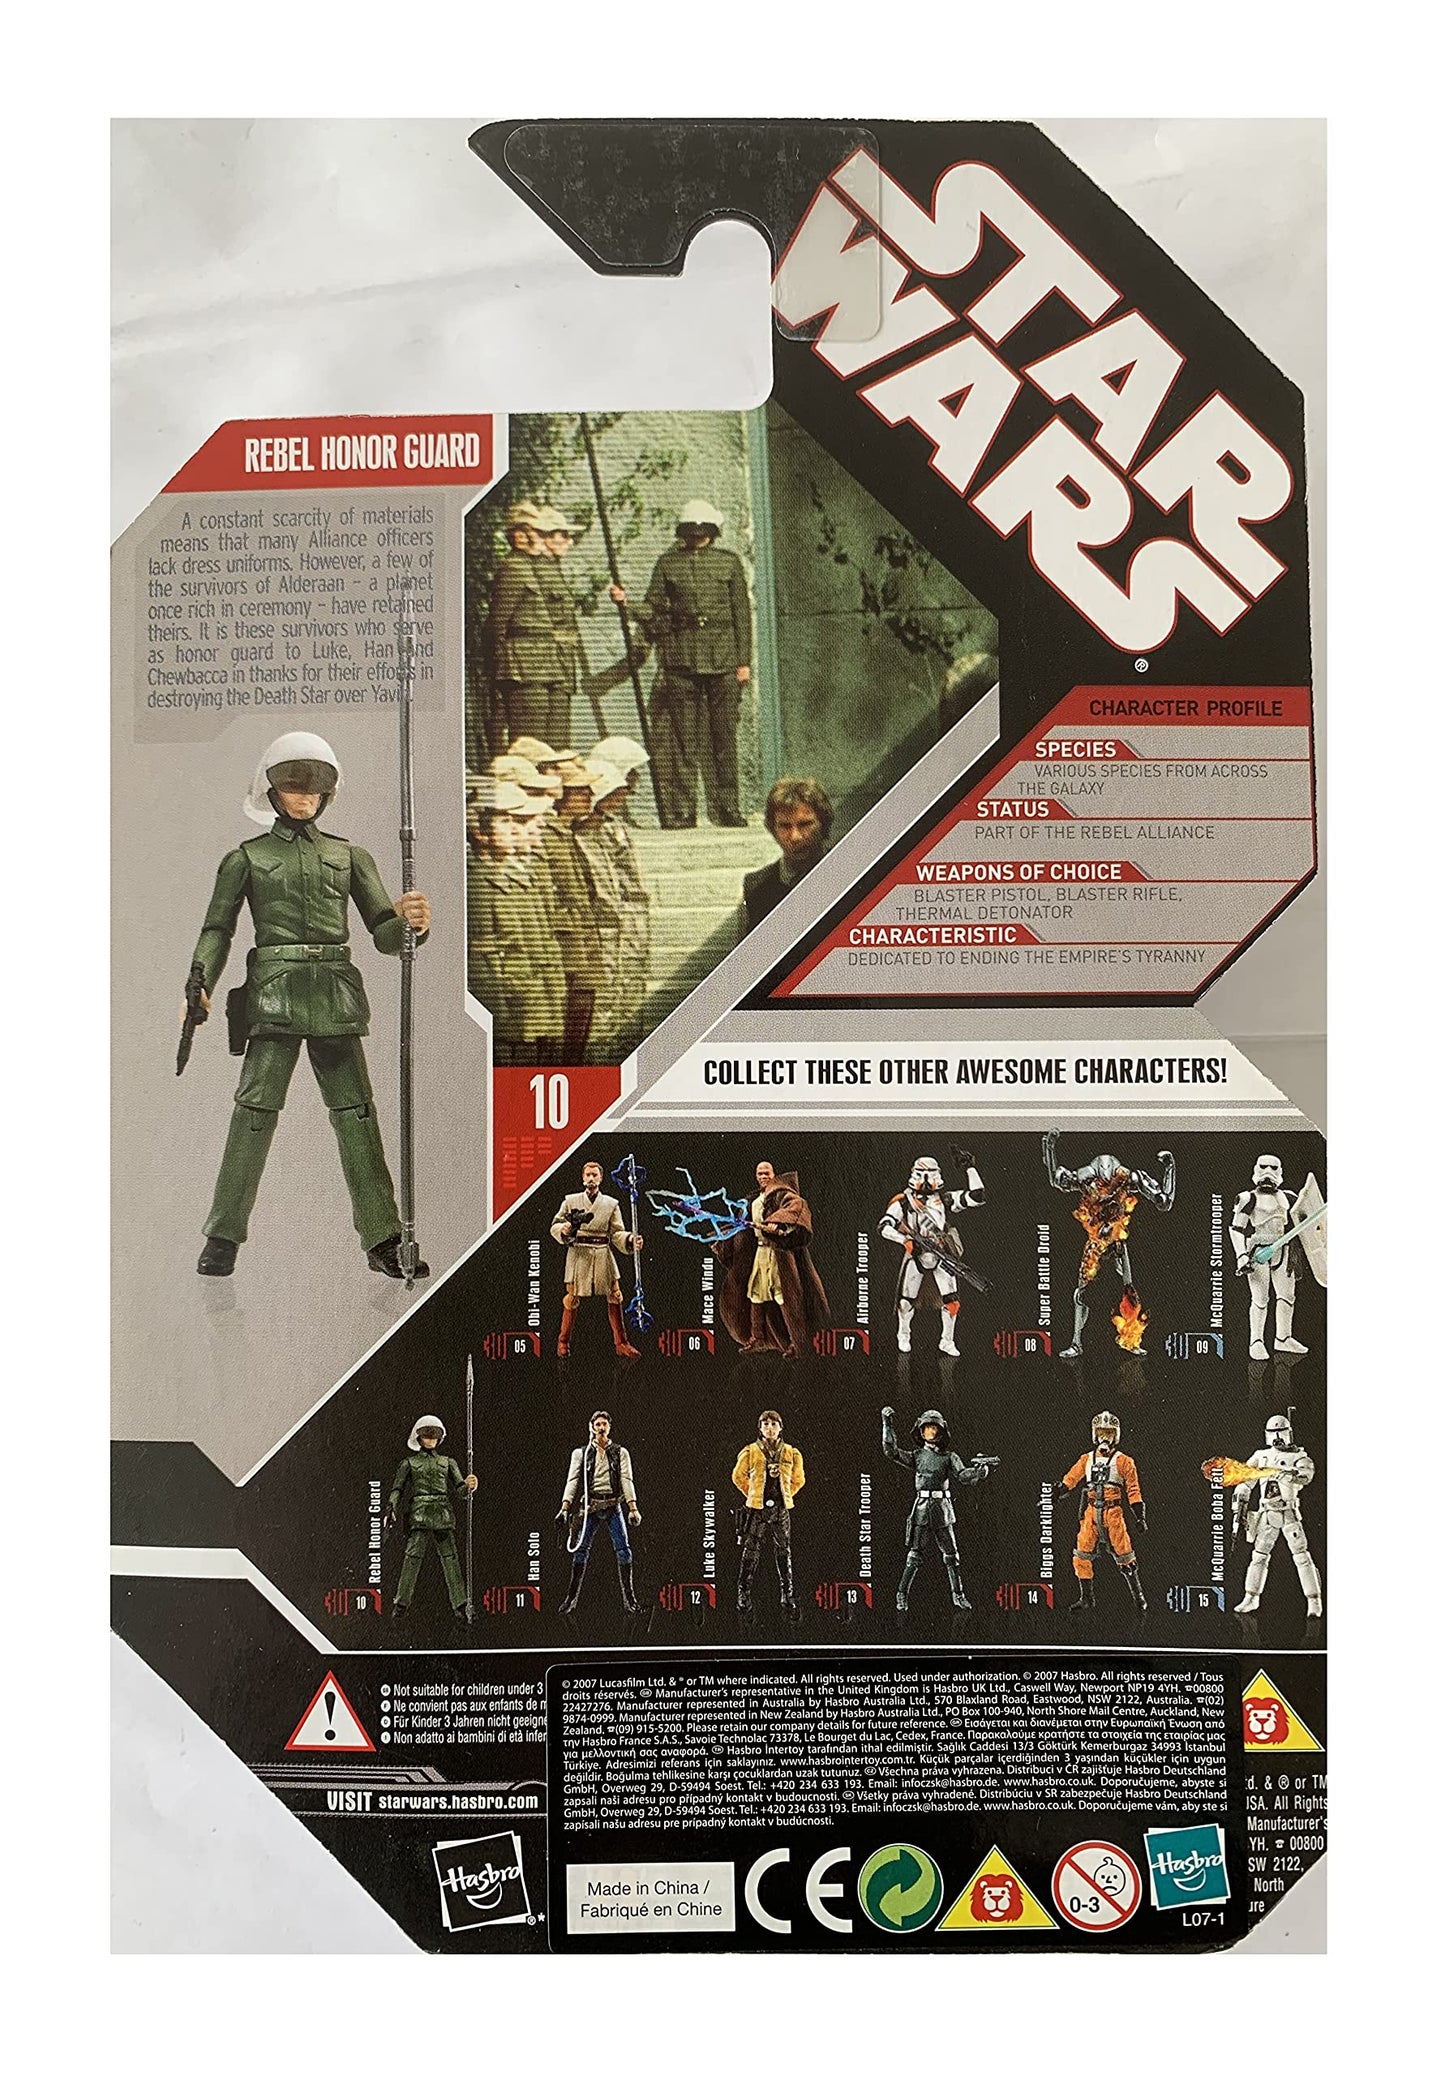 Vintage 2007 Star Wars Saga 30th Anniversary A New Hope Rebel Honor Guard Action Figure With Exclusive Collector Coin - Brand New Factory Sealed Shop Stock Room Find